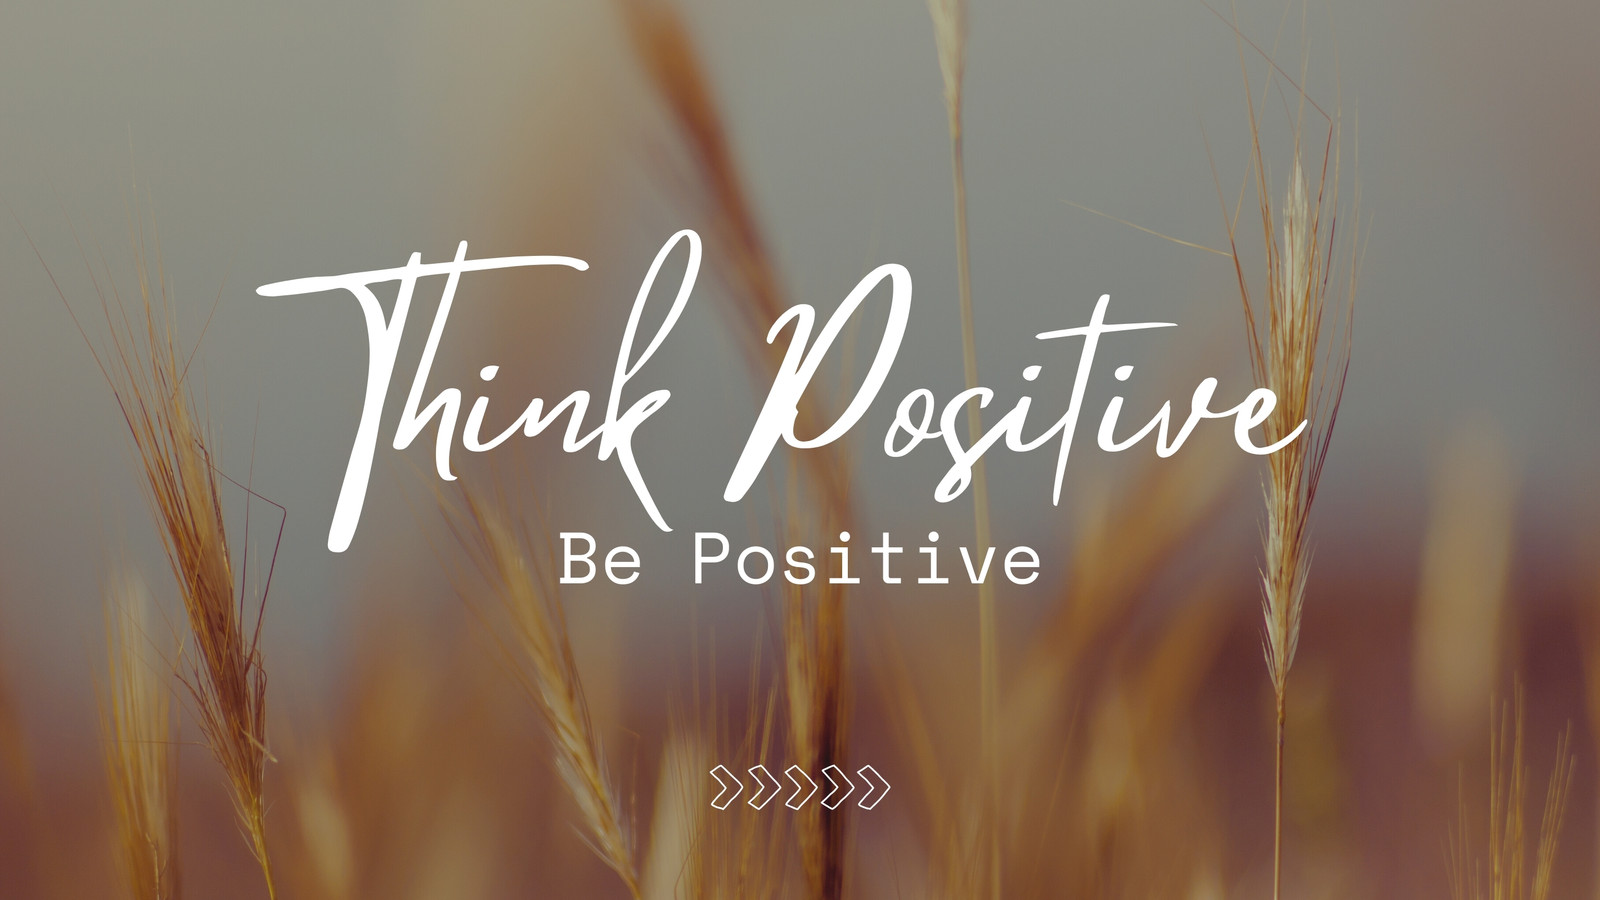 100+] Stay Positive Wallpapers | Wallpapers.com